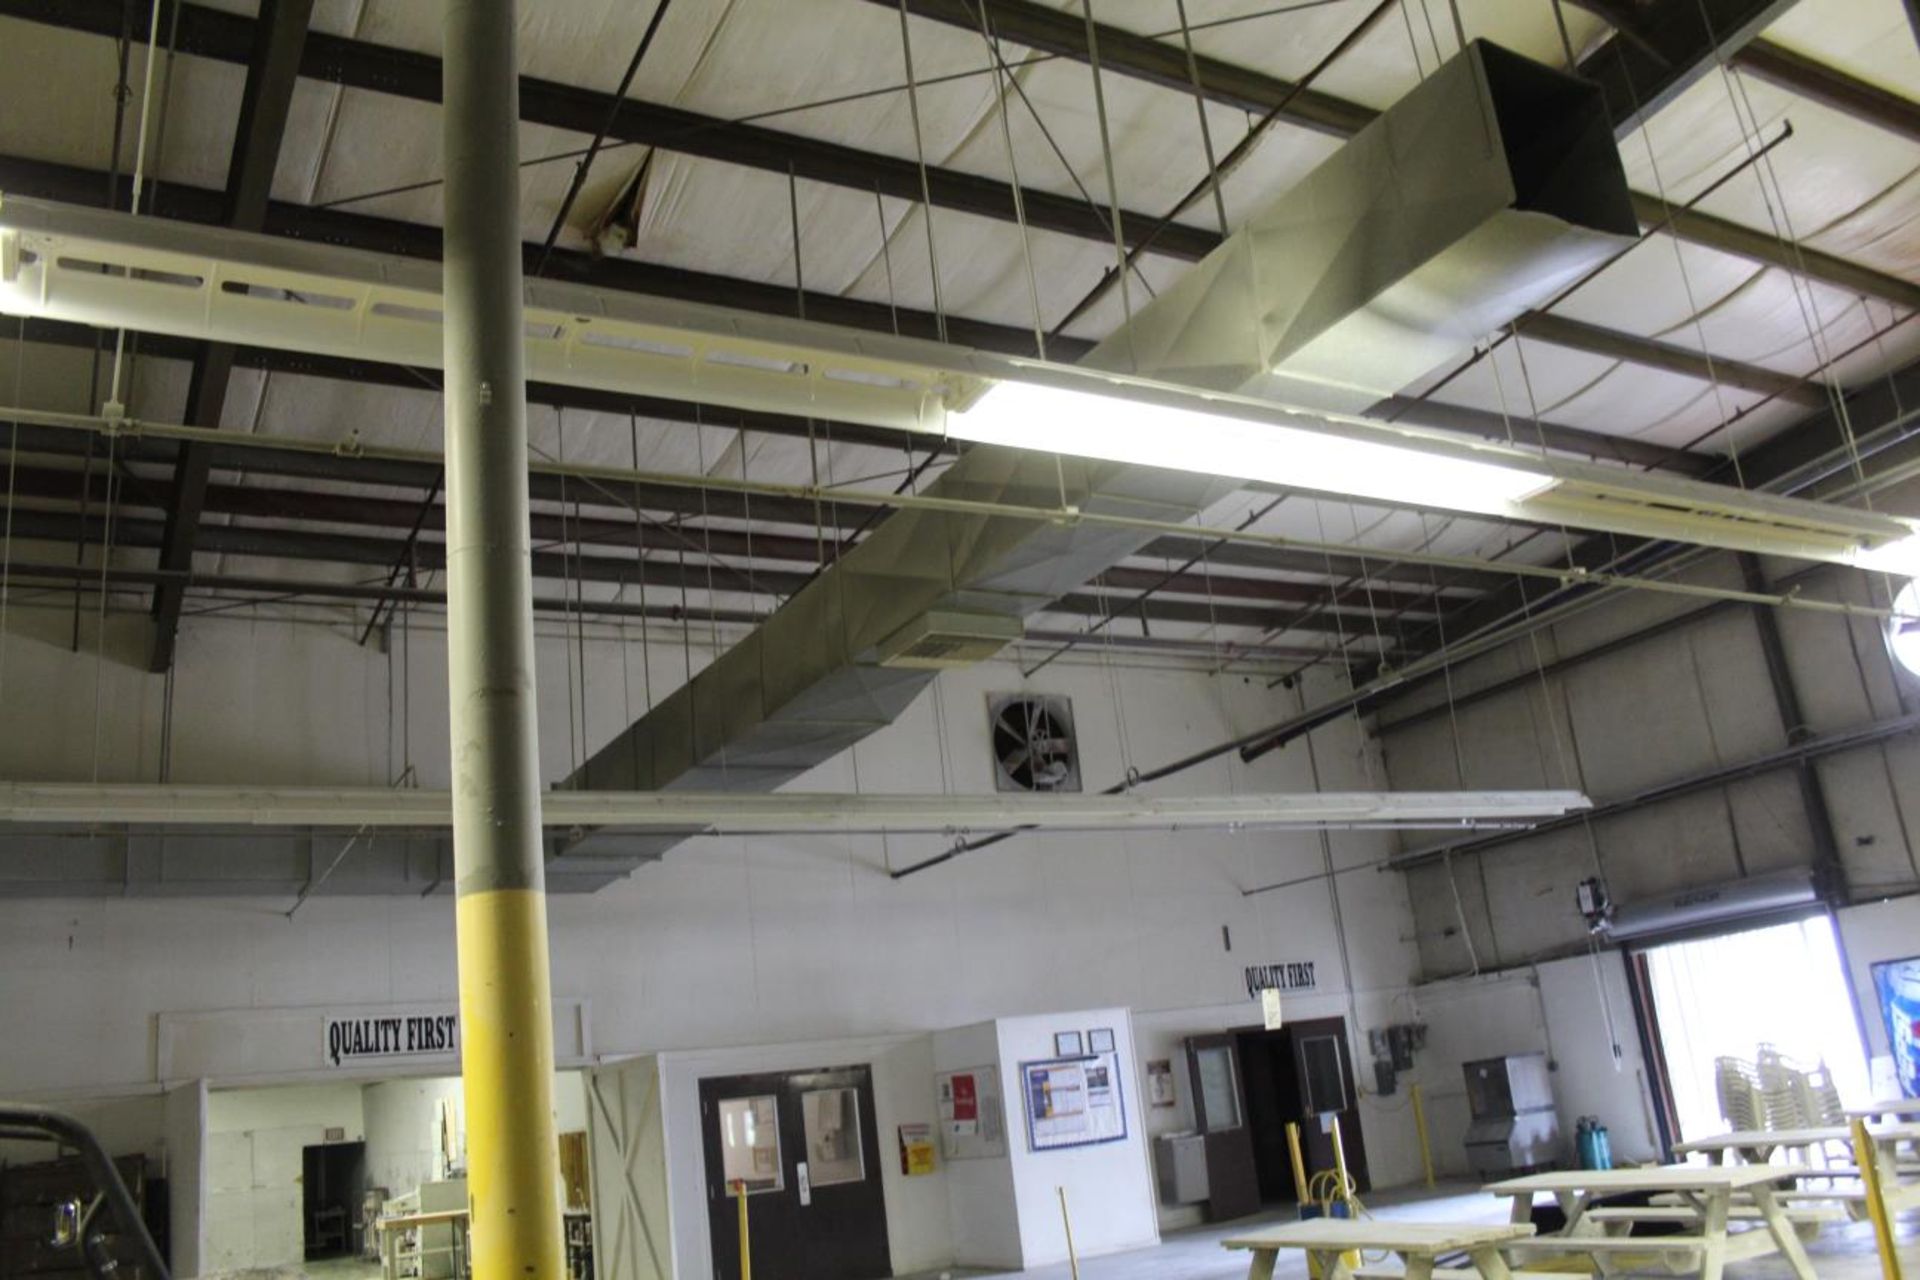 Square Duct Work, All of the sqare duct in the warehouse portion of the building. Office Ducts Are - Image 2 of 6